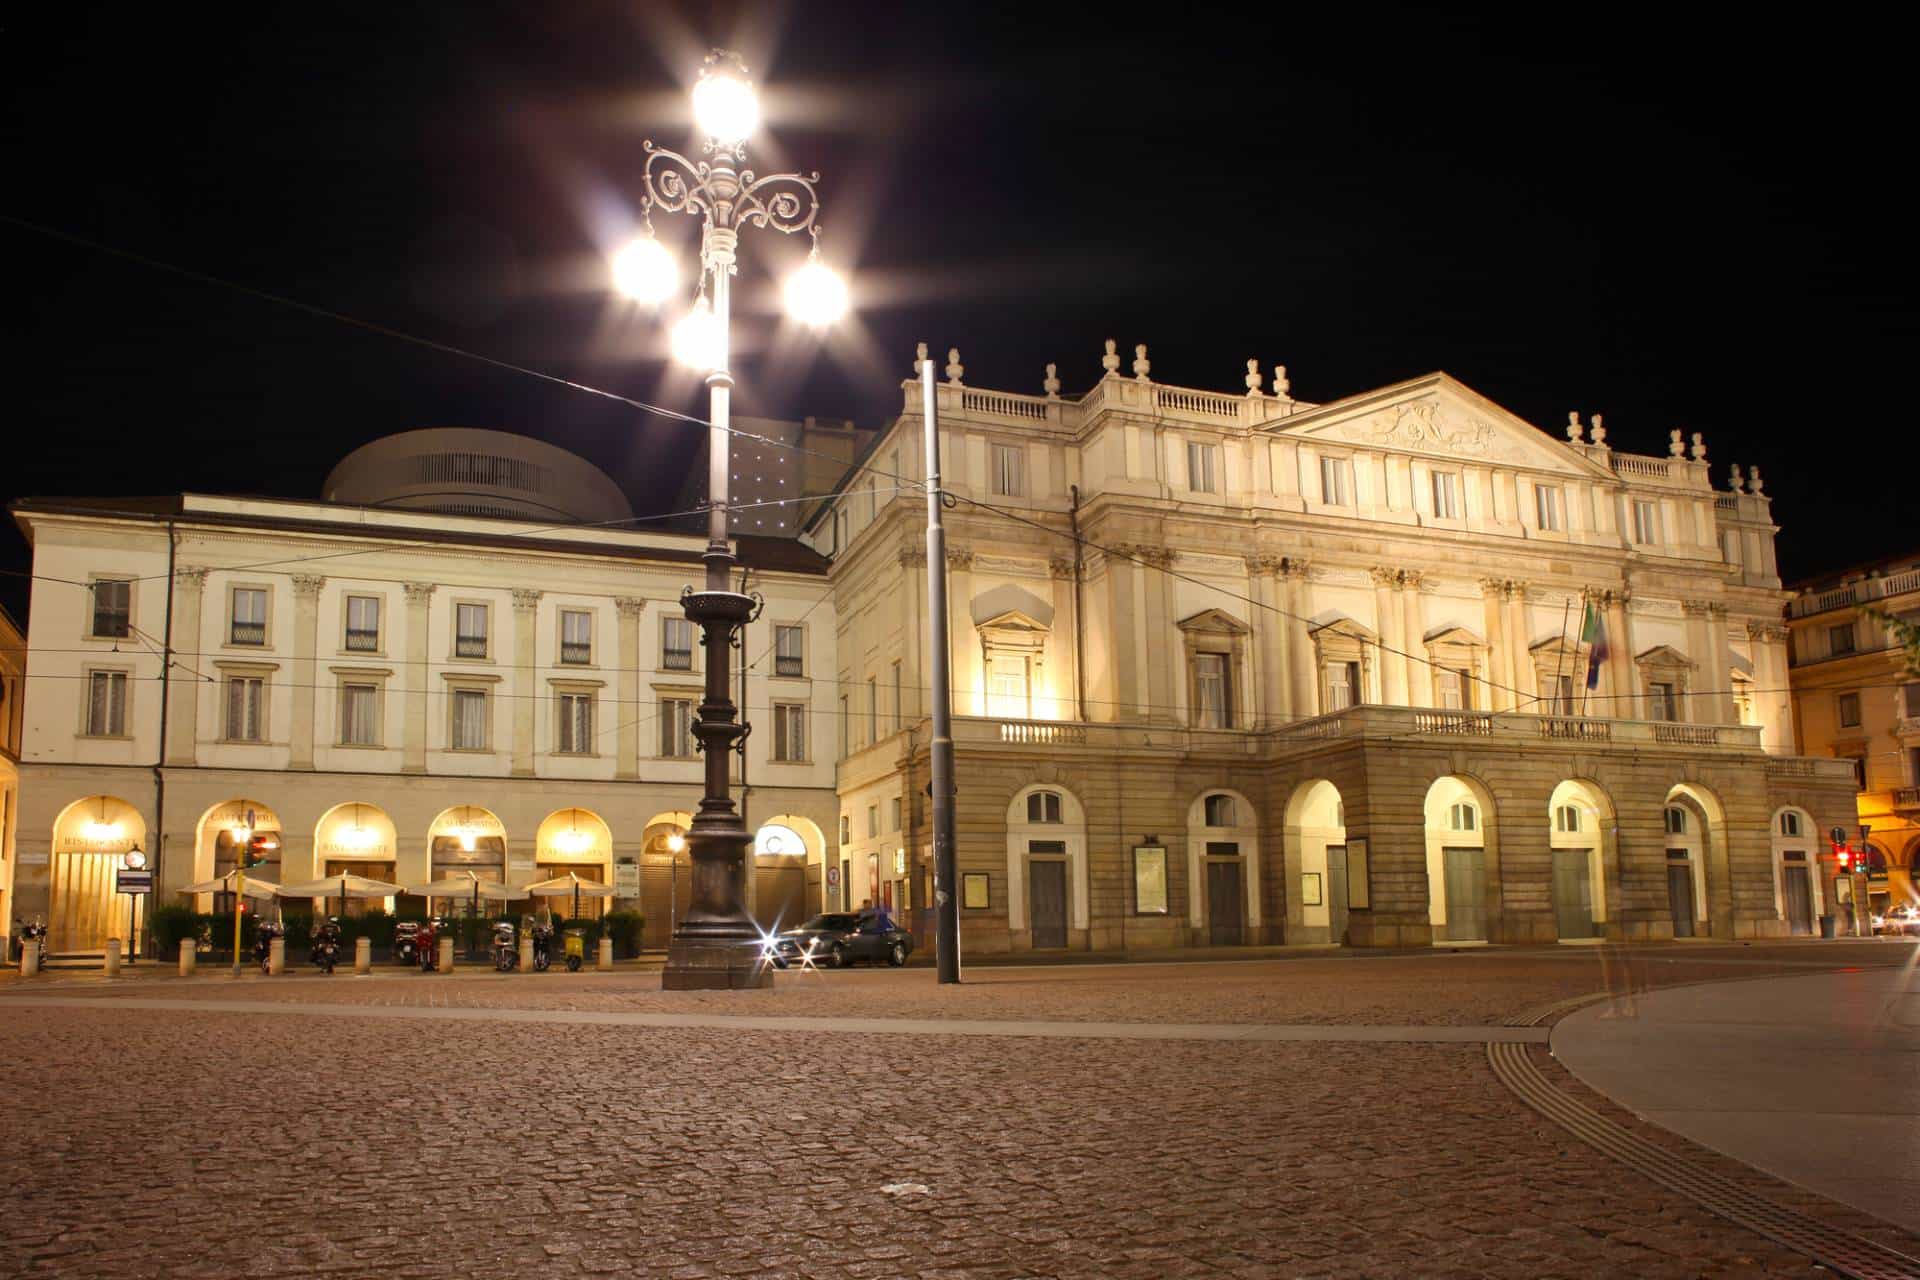 What are some of the more famous Italian Opera Houses and what premiered there?